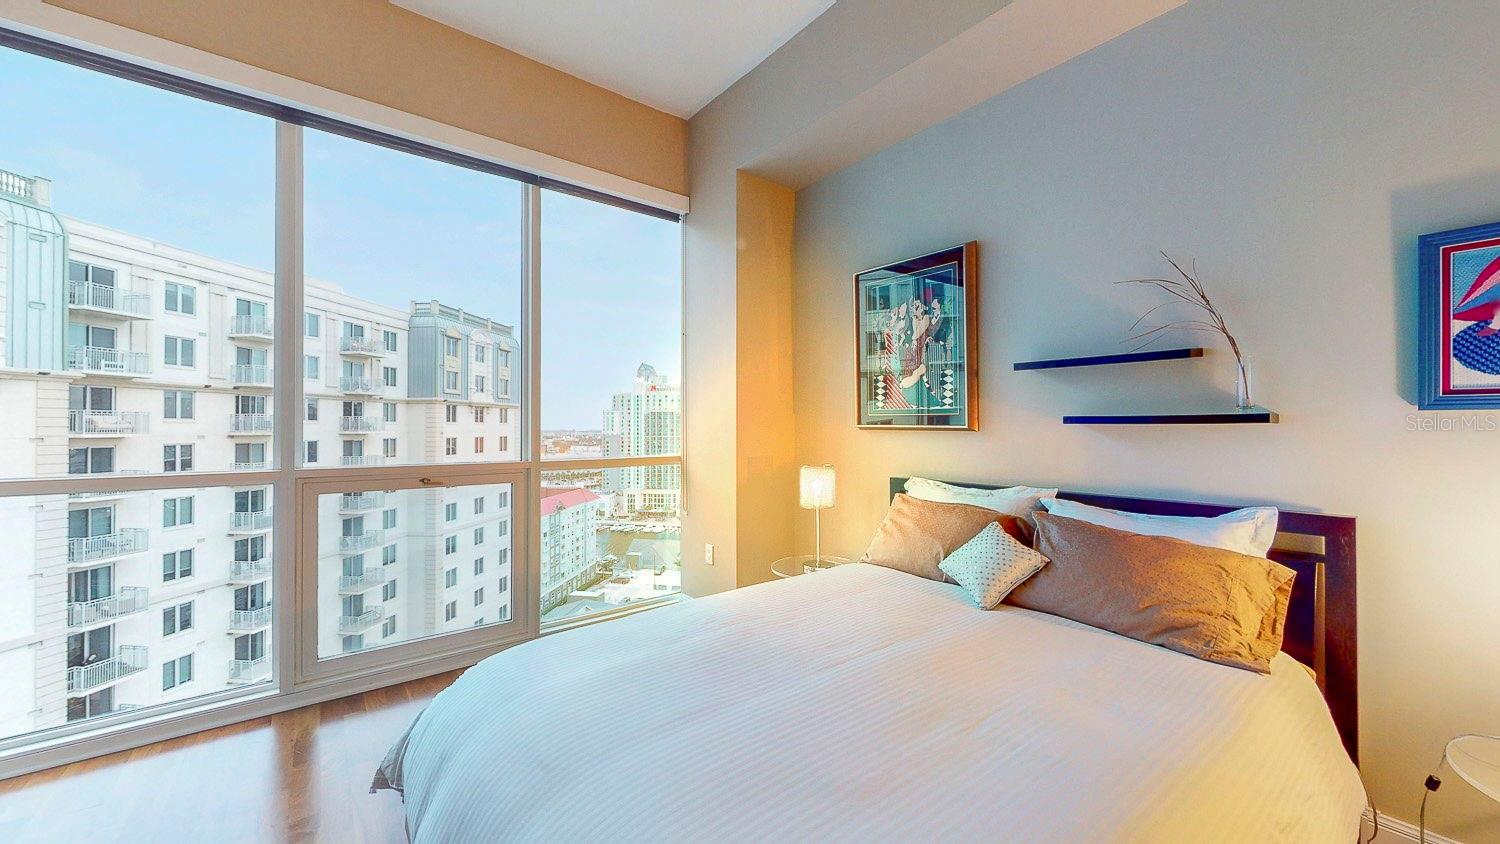 Full floor-to-ceiling windows in each secondary bedroom provide stunning city views.